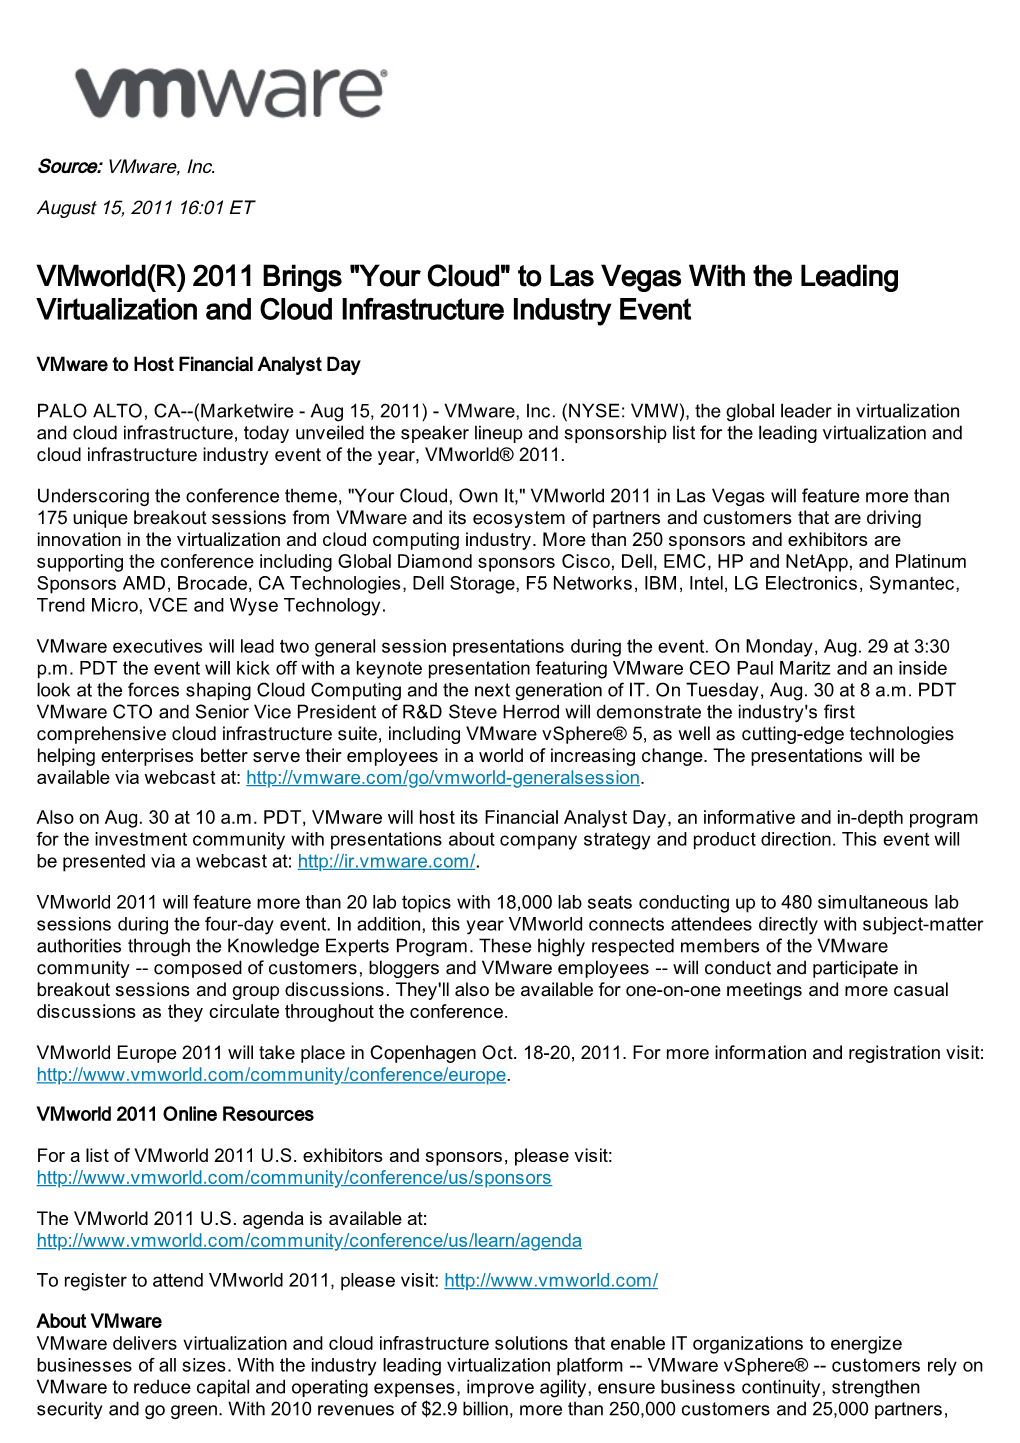 Vmworld(R) 2011 Brings "Your Cloud" to Las Vegas with the Leading Virtualization and Cloud Infrastructure Industry Event